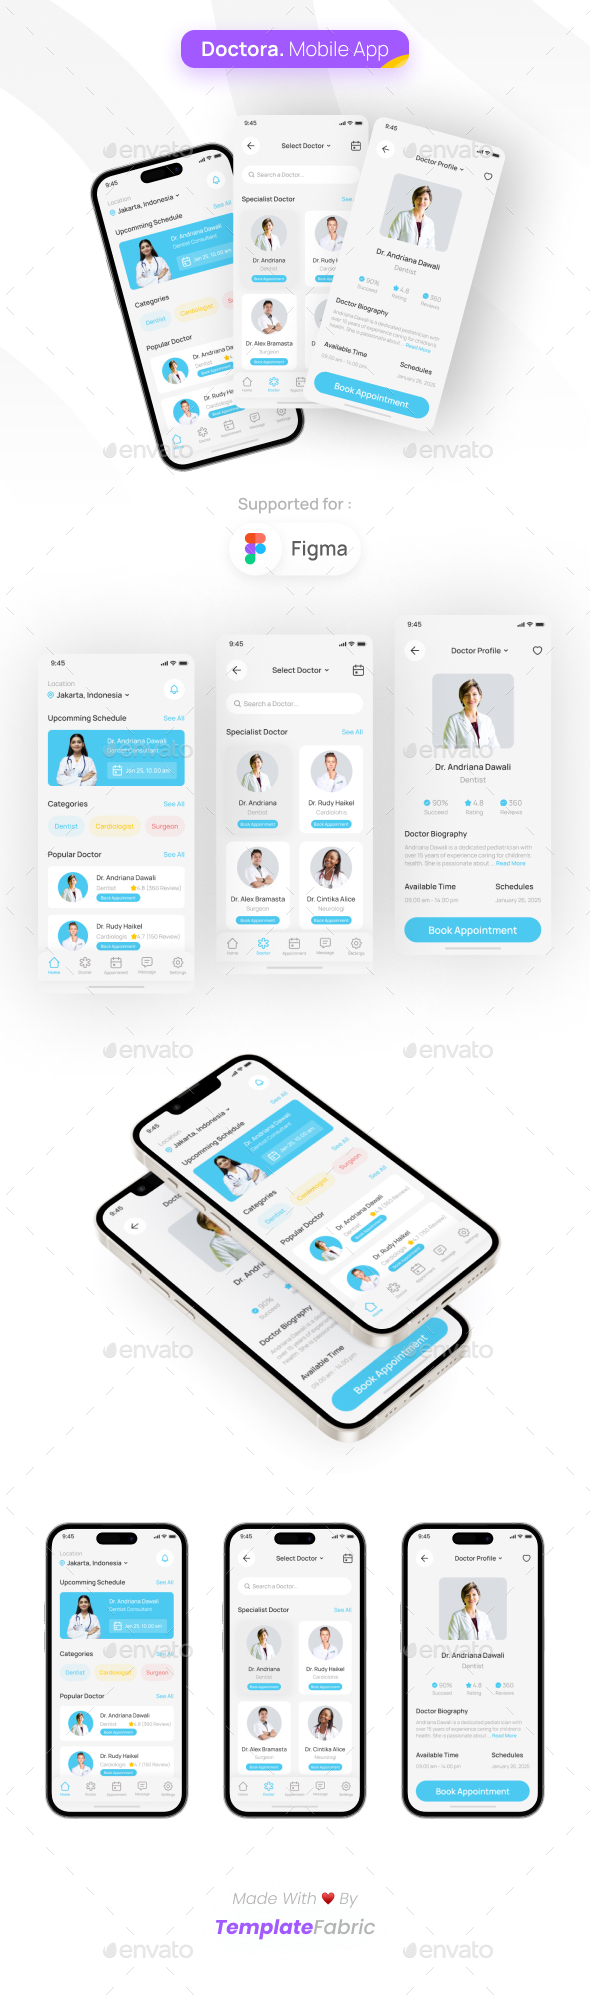 [DOWNLOAD]Doctora - Doctor Appointment Mobile App UI Kit